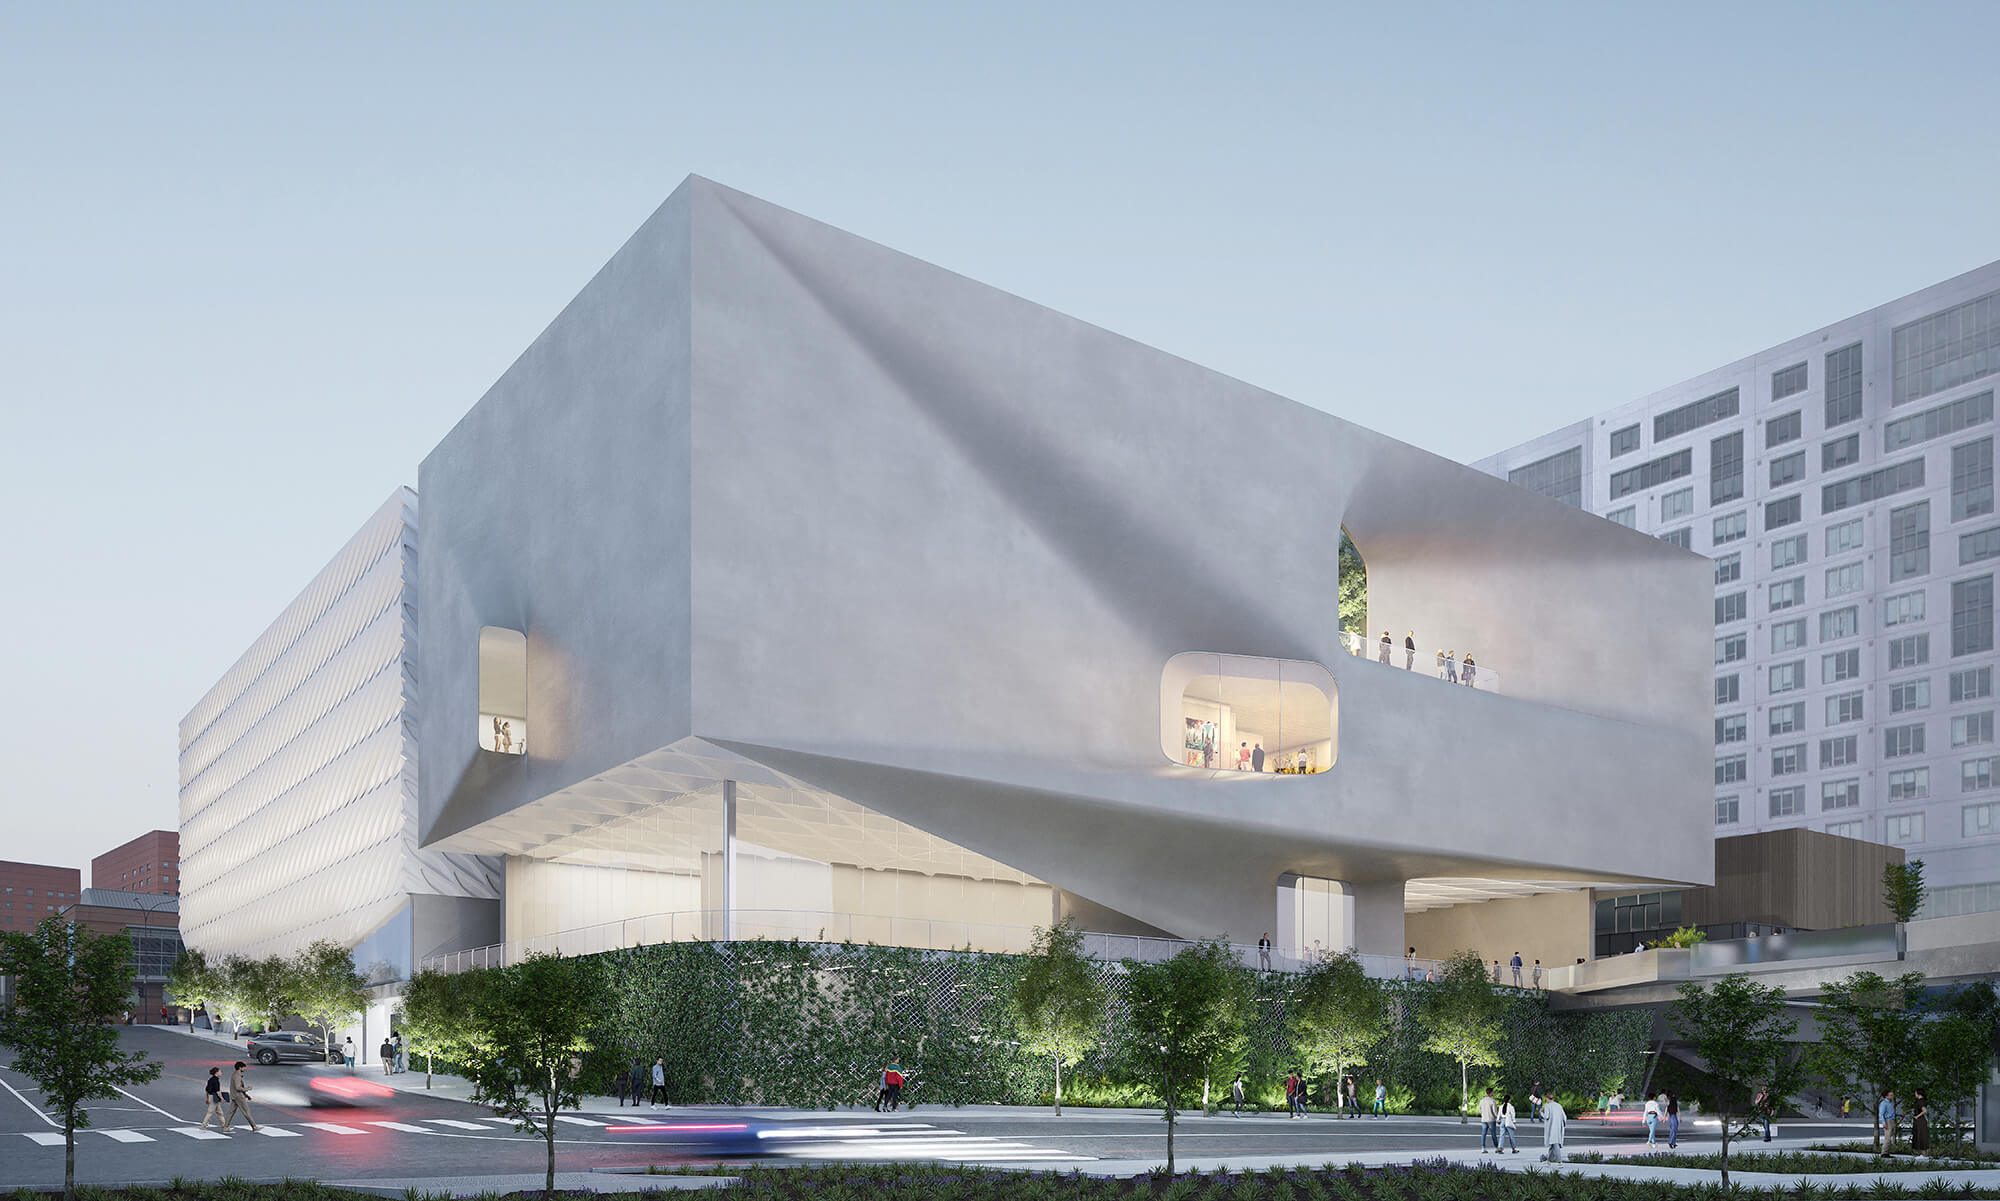 Diller Scofidio + Renfro unveils expansion for The Broad in downtown Los Angeles